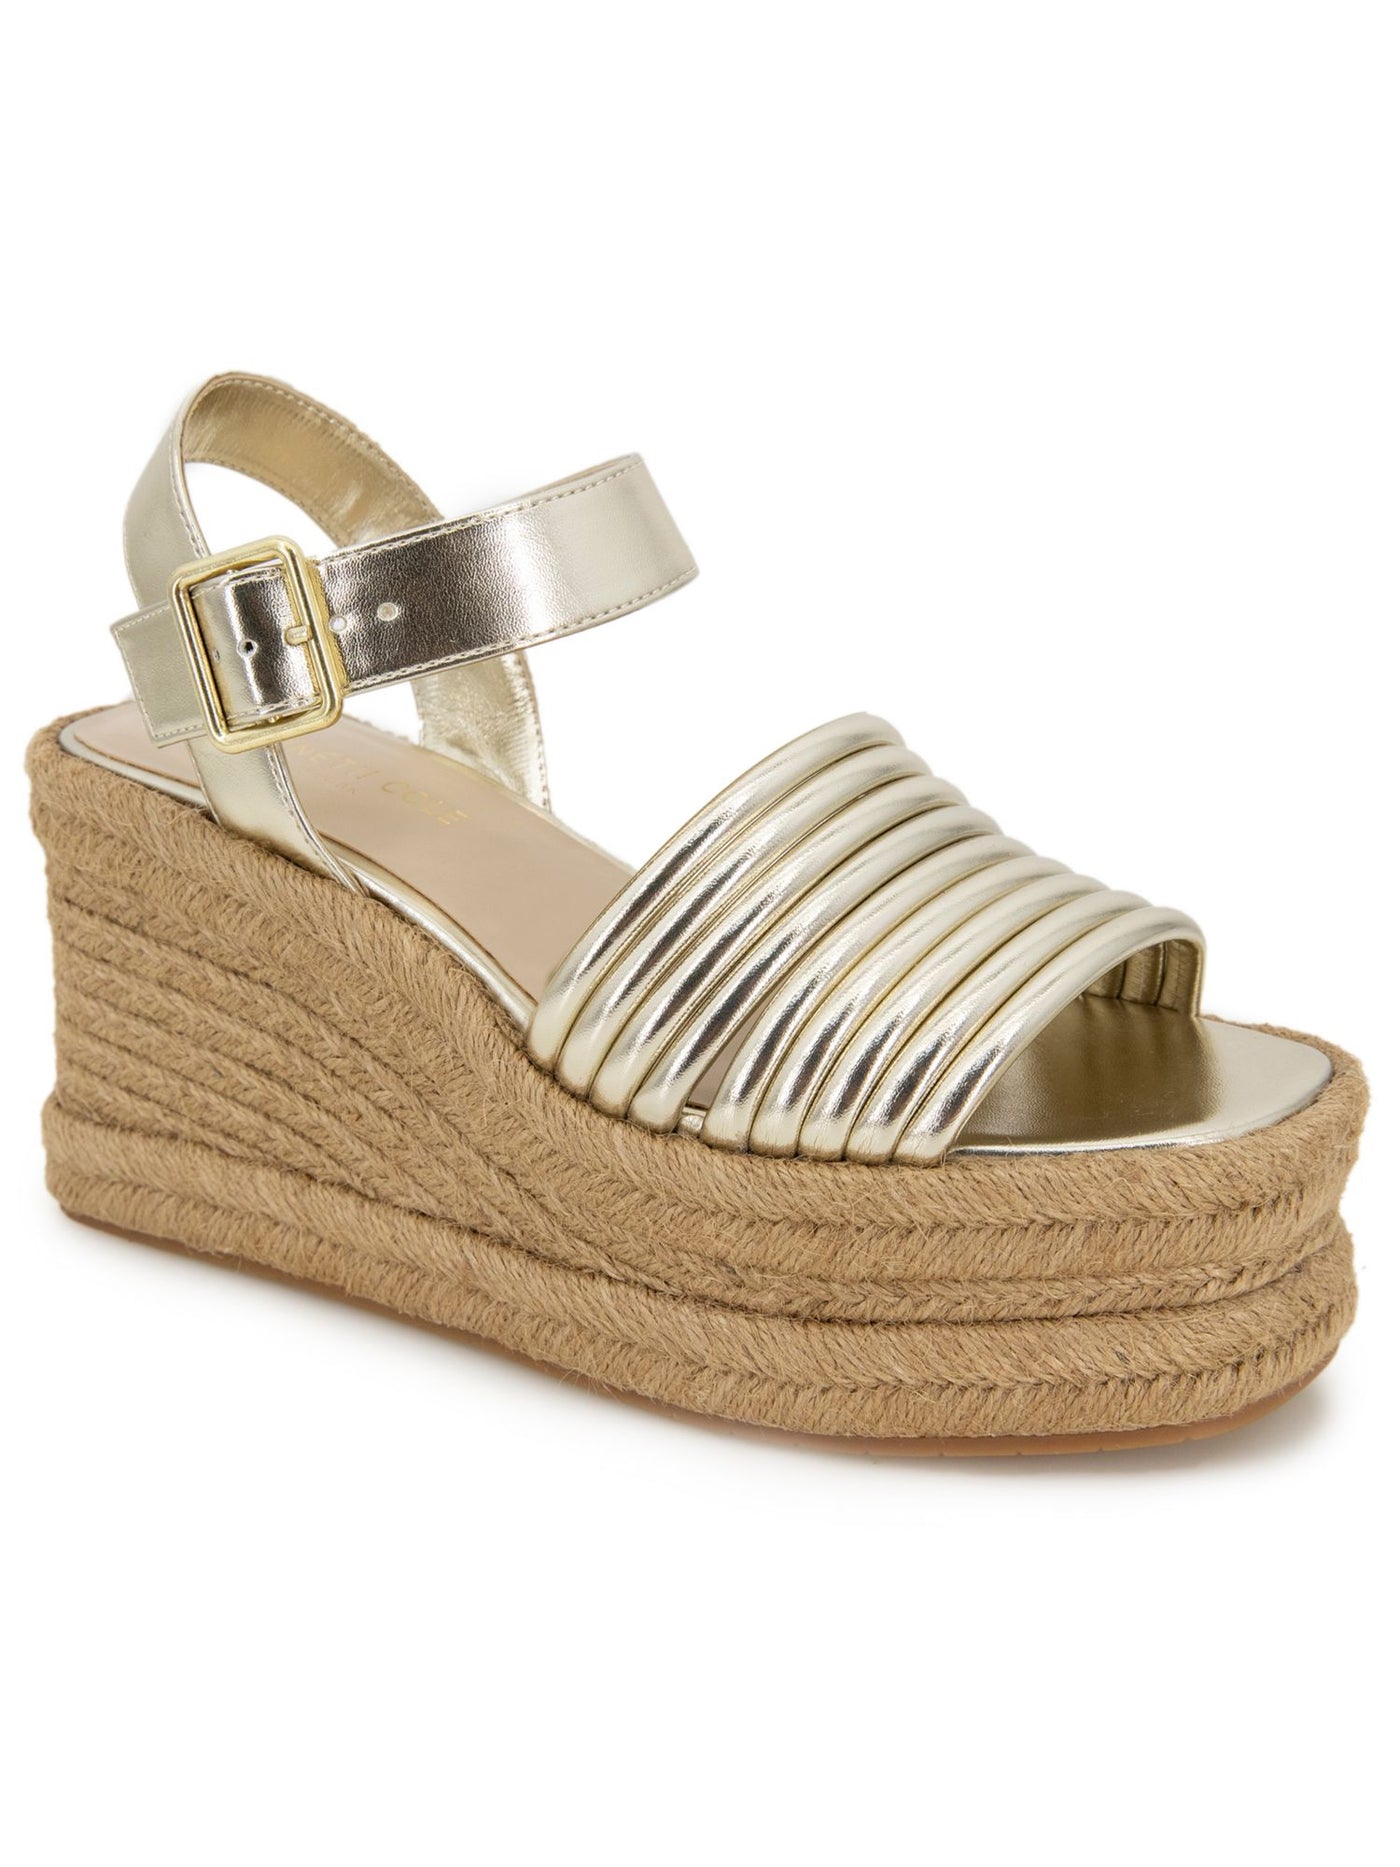 KENNETH COLE NEW YORK Womens Gold 2 Wedge Adjustable Ankle Strap Strappy Padded Shelby Open Toe Wedge Buckle Espadrille Shoes 6.5 M